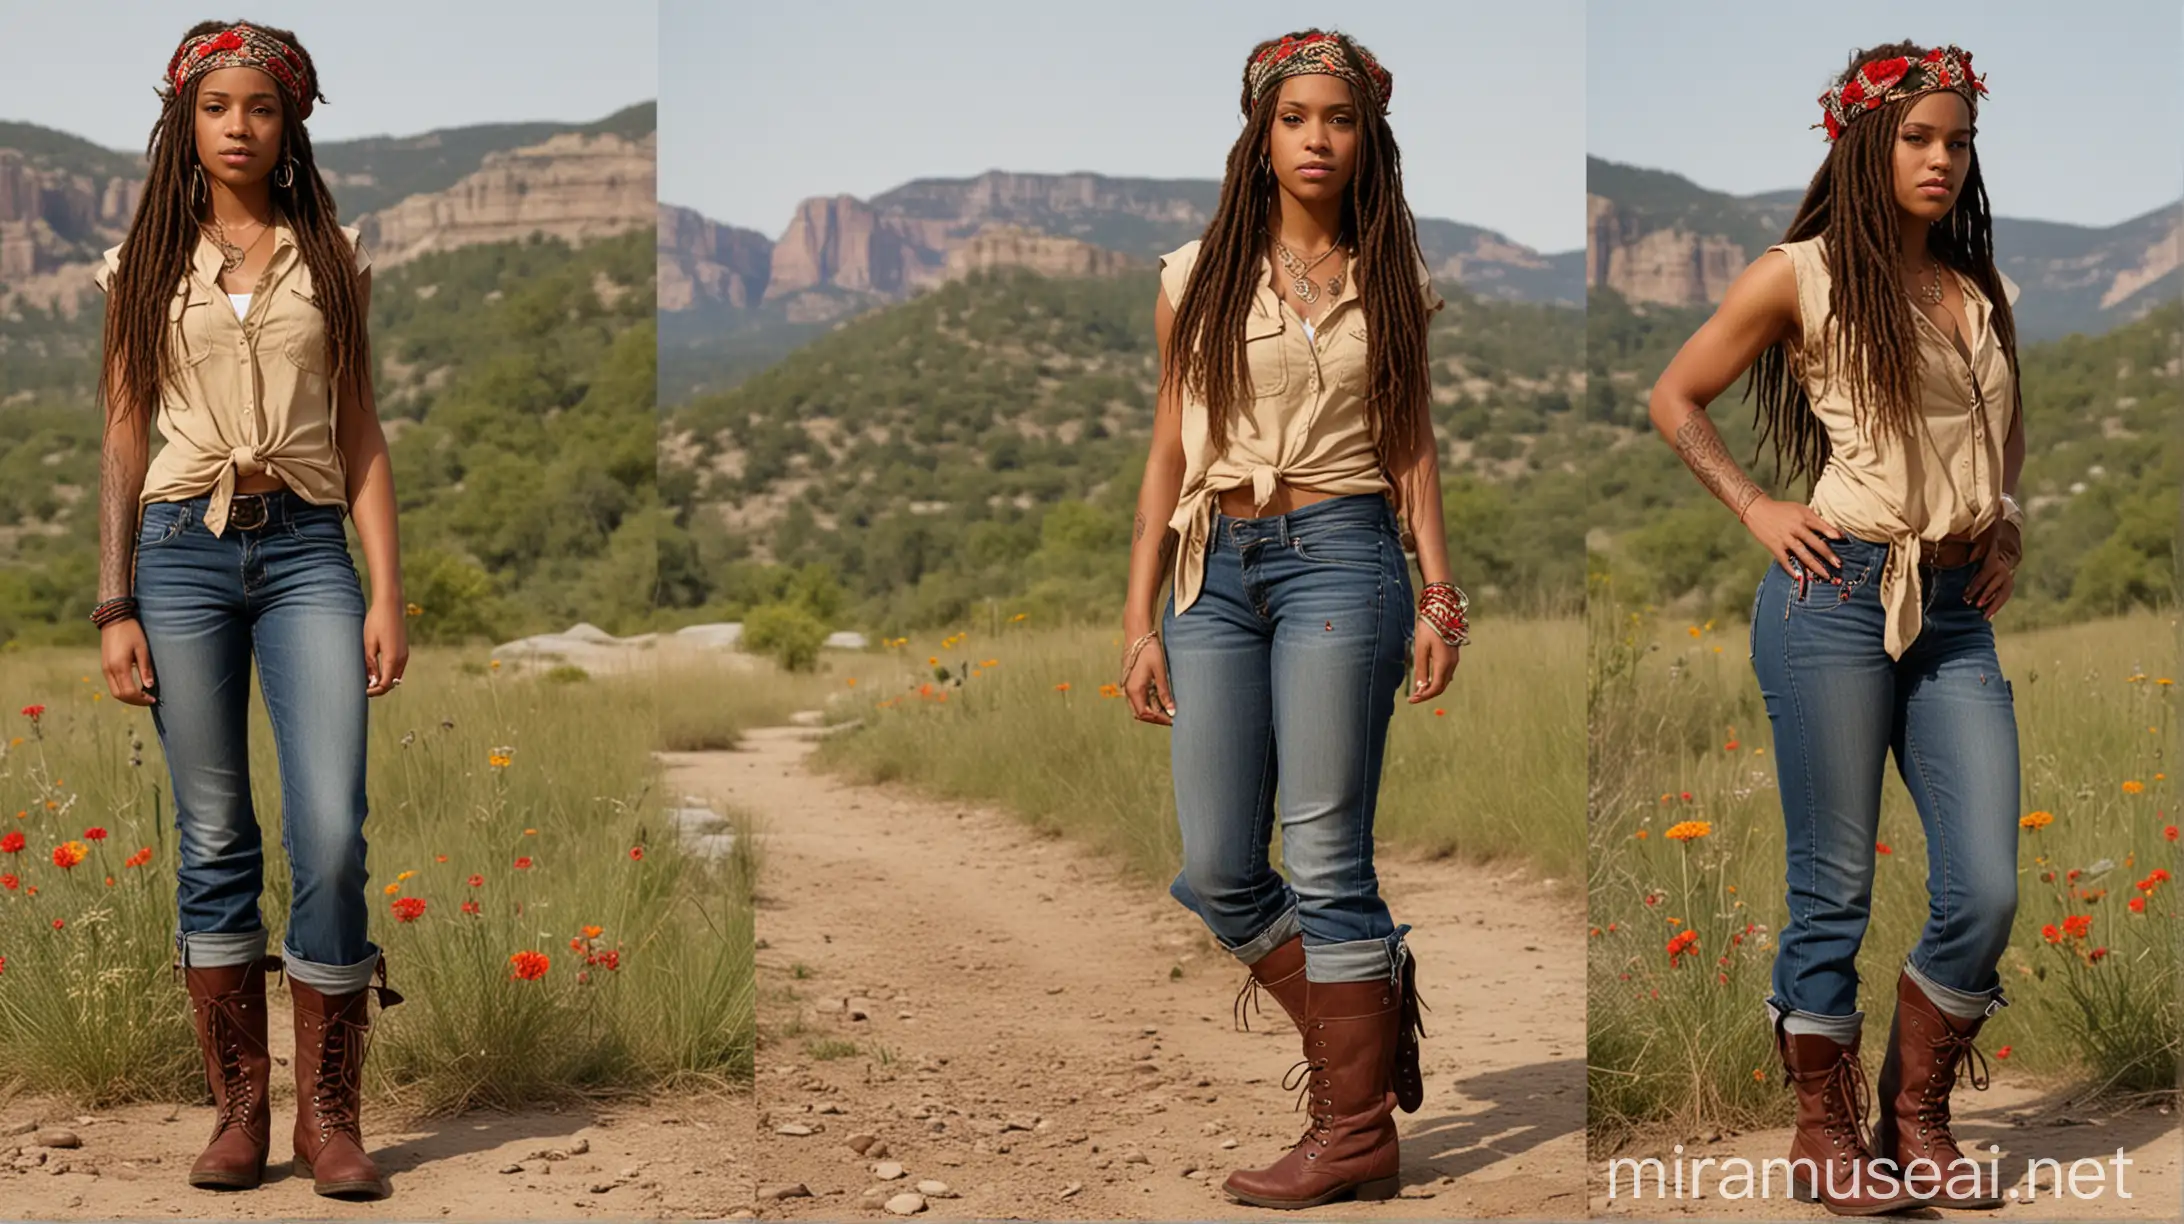 A 29-year-old black woman. She had long dreadlock brown hair, with a scarlet satin paisley flowers print headband. Has a muscular body, dark eyes and tattoos on arms. She wore a khaki tie front sleeveless shirt, denim bermuda with a sheath on her waist, hiking leather boots, and a golden necklace. She carries an determination and distrustful aura. Full-body model